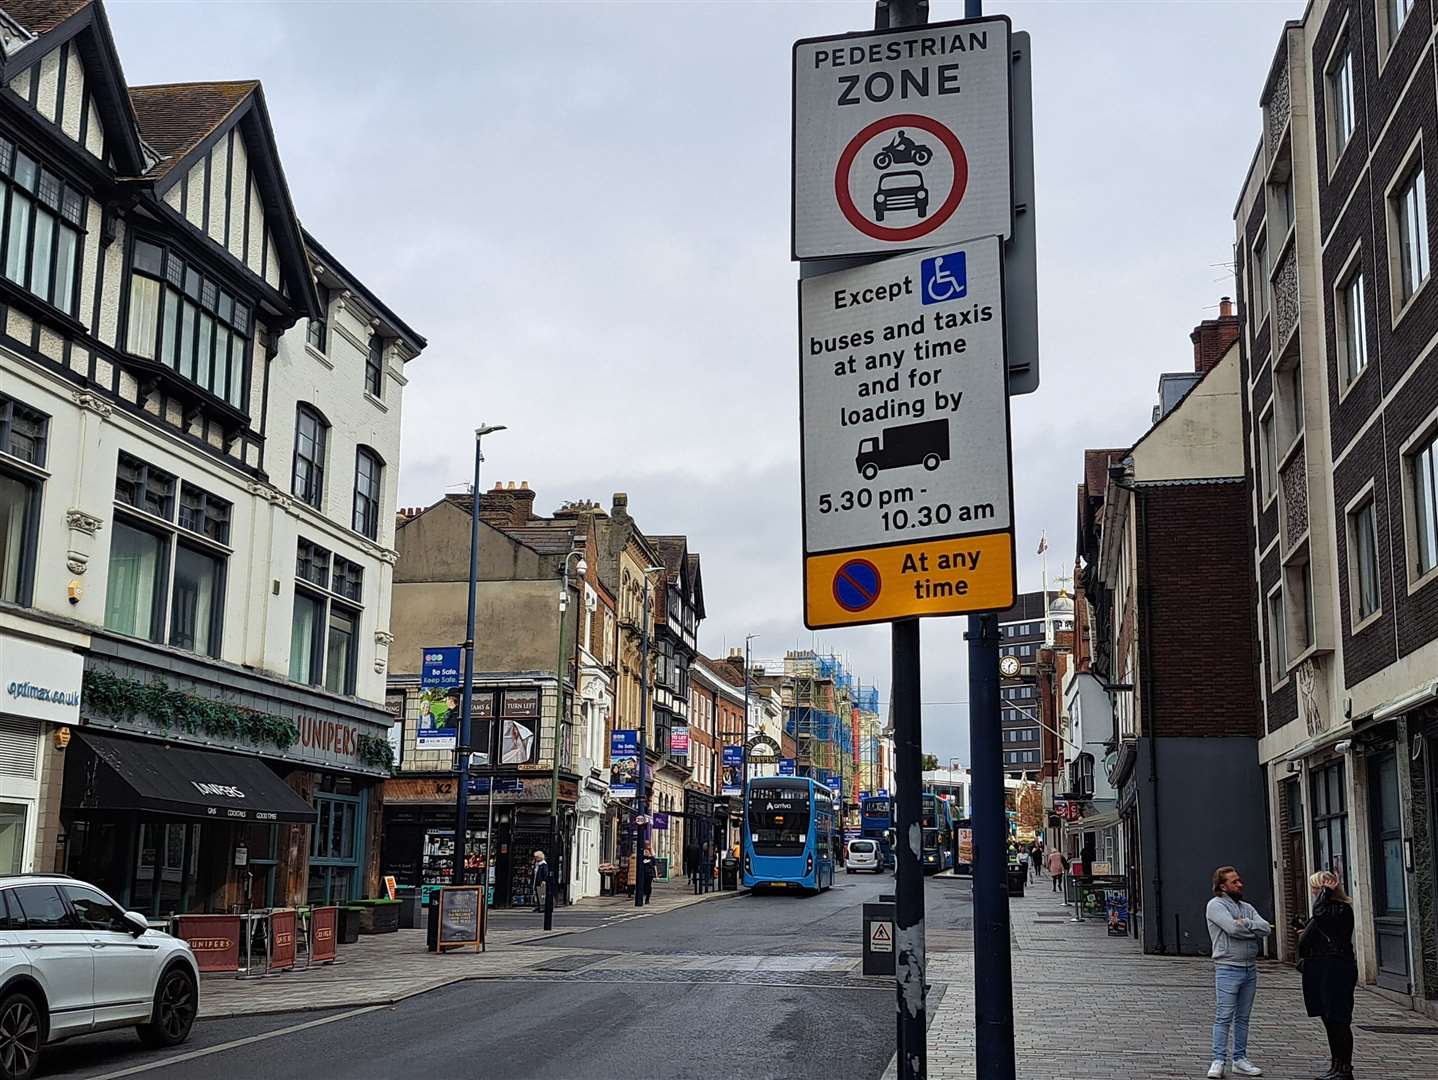 ANPR cameras will soon be appearing in Maidstone High Street